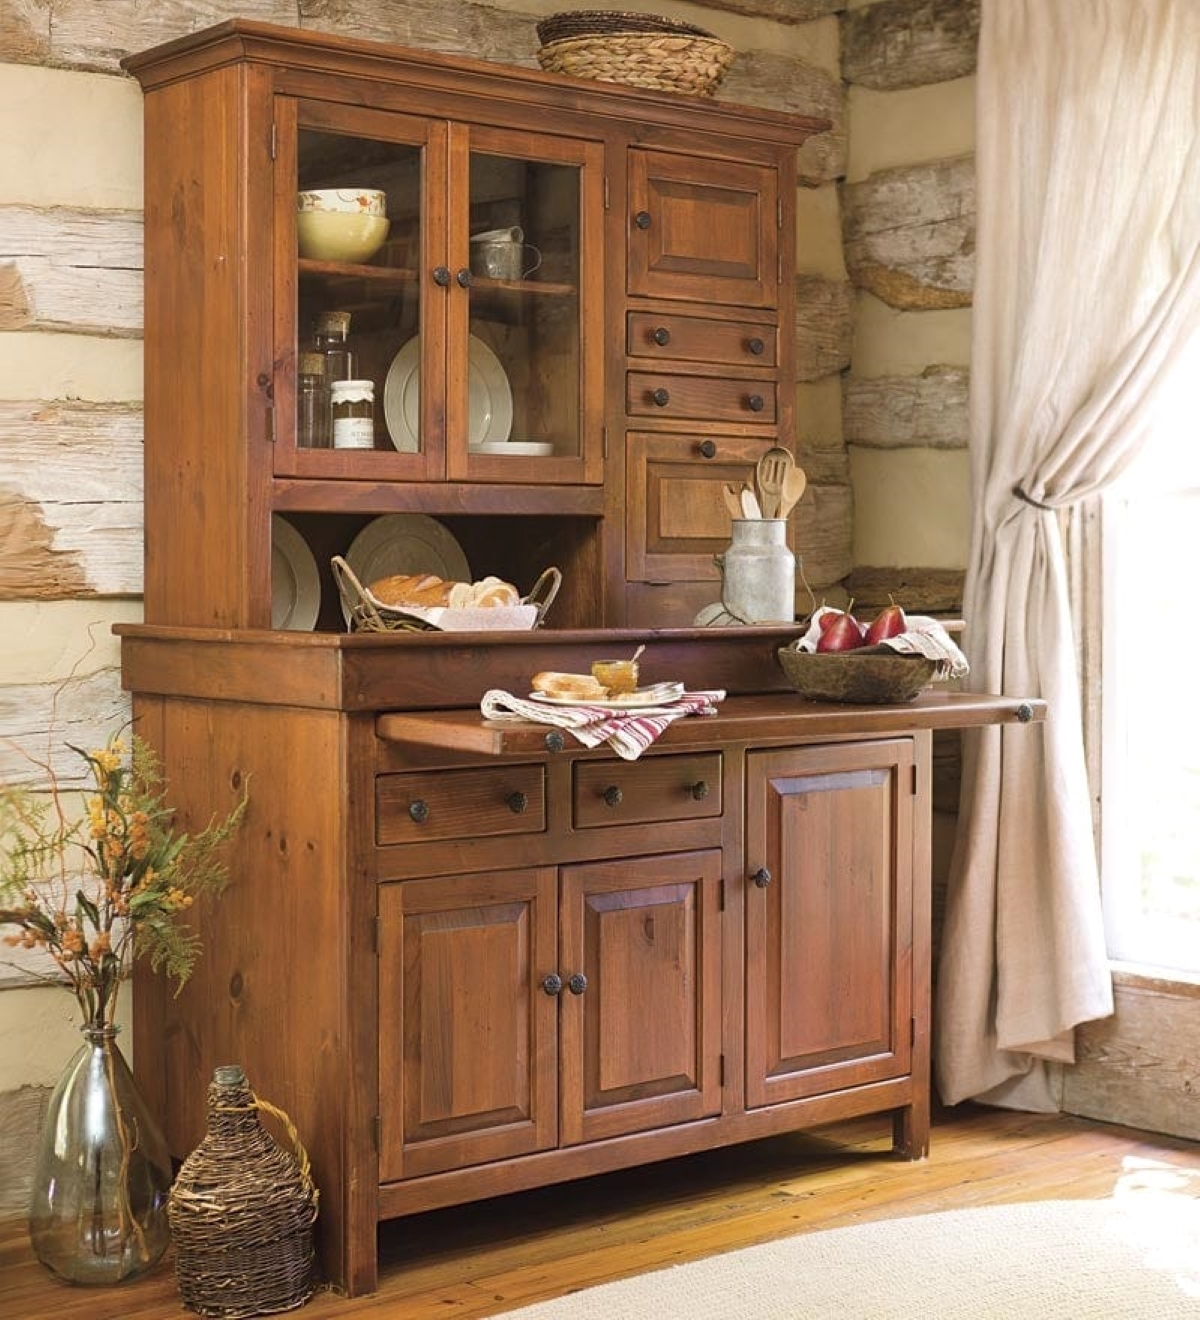 Wooden hoosier cabinet with dishes of food on counter